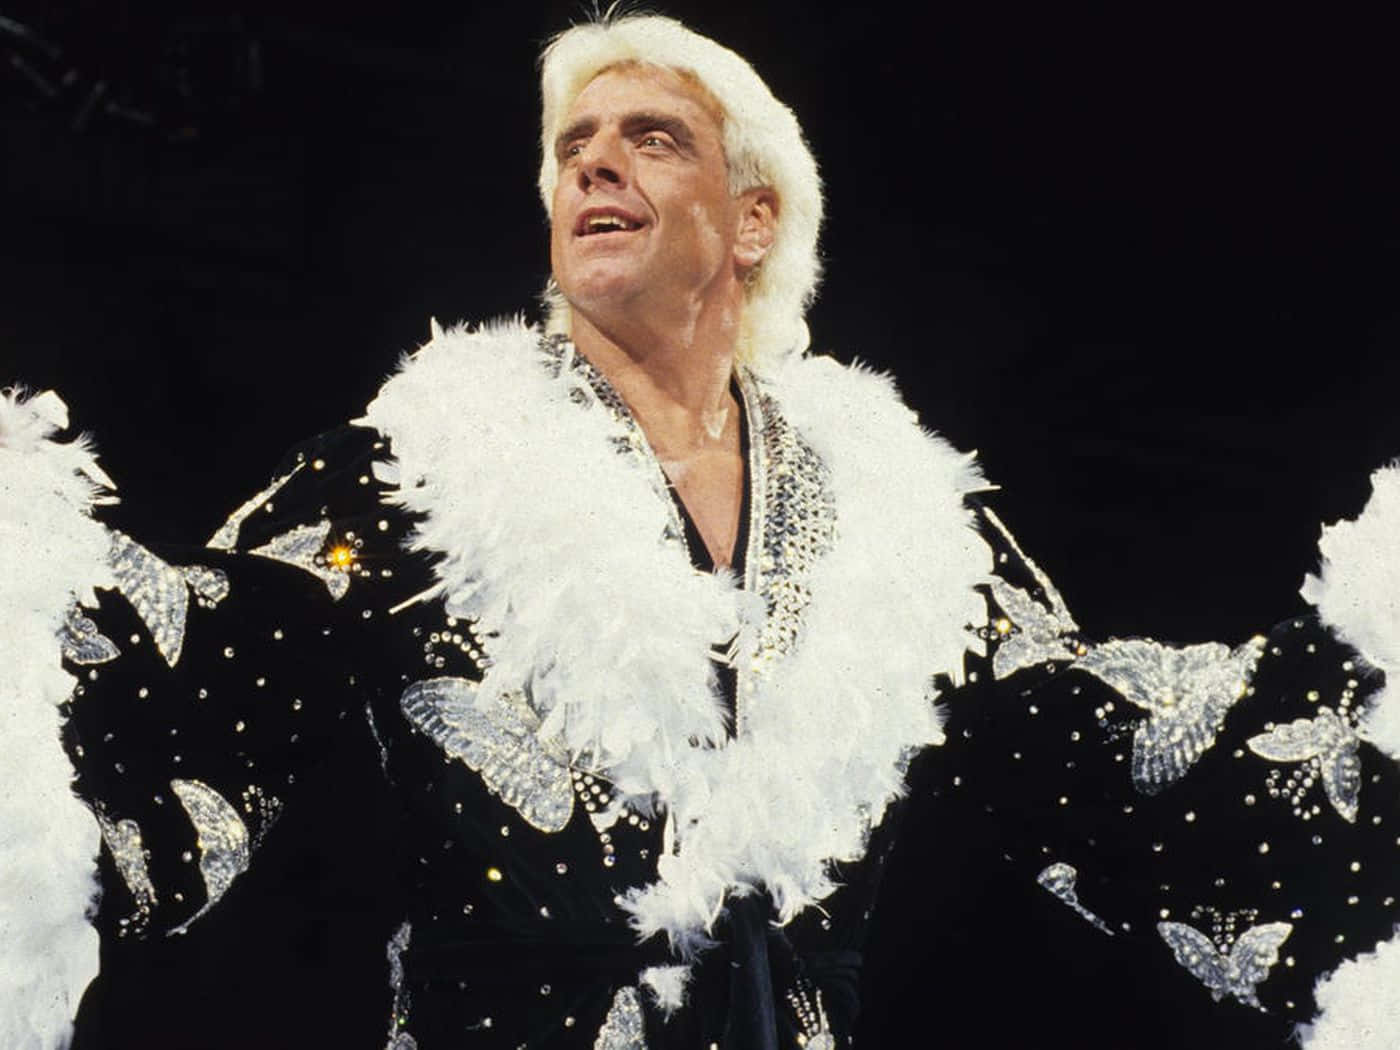 Ric Flair Entertains The Crowd Background